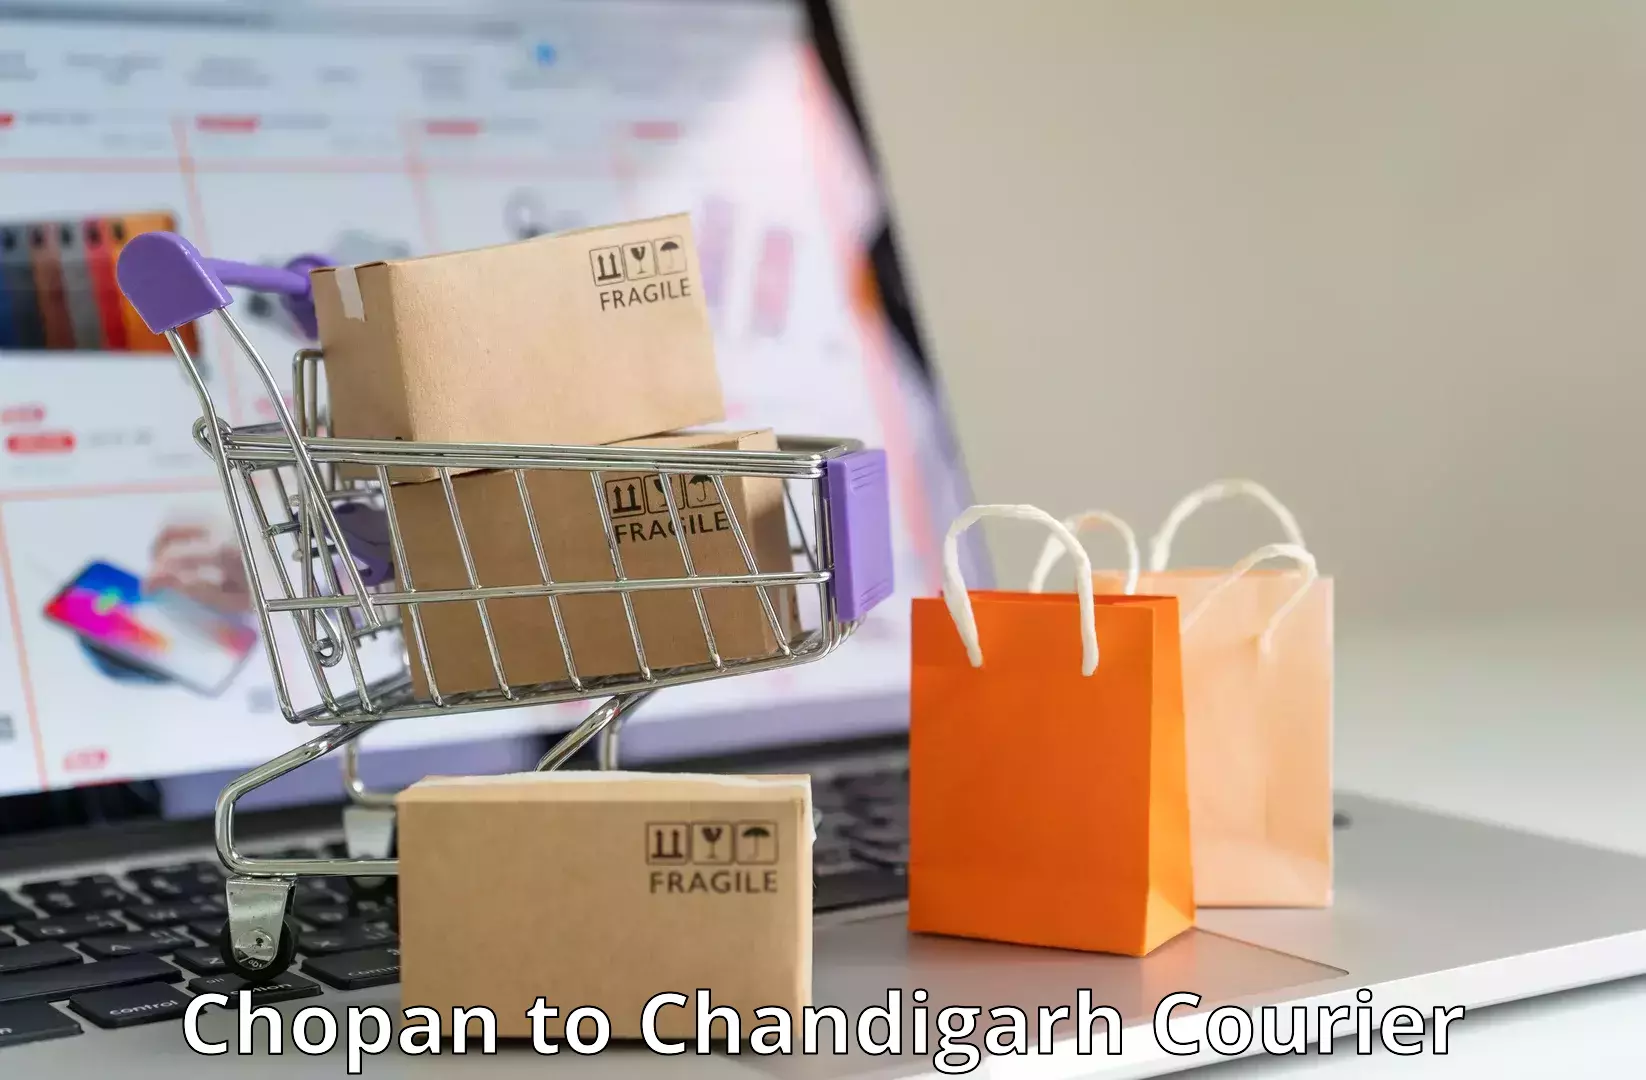 Enhanced tracking features Chopan to Chandigarh